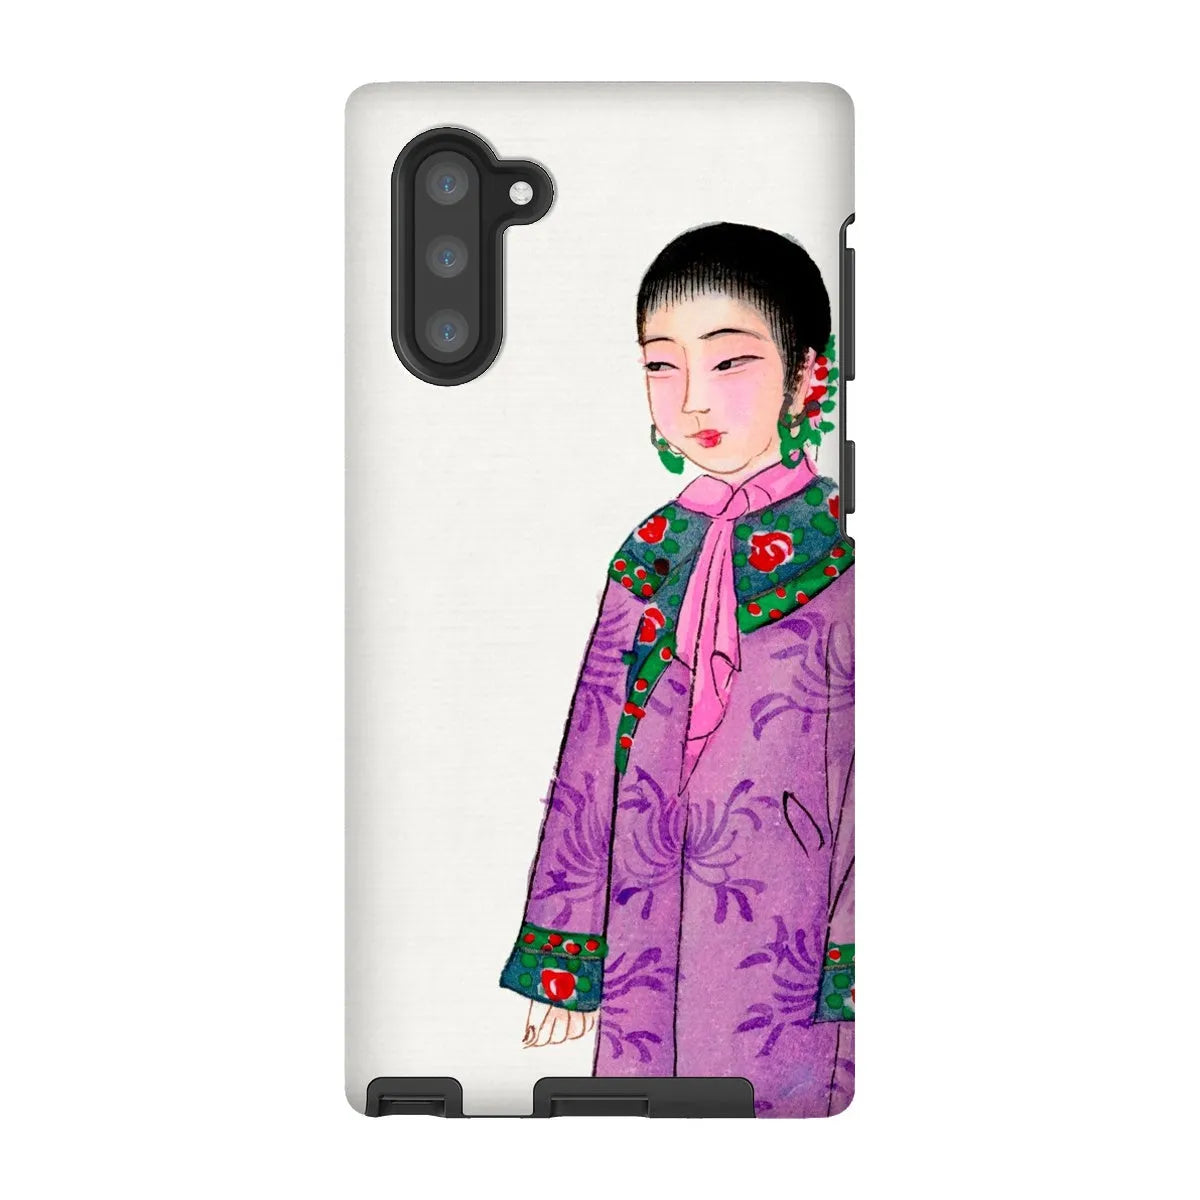 Manchu Noblewoman - Chinese Aesthetic Art Phone Case - Samsung Galaxy Note 10 / Matte - Mobile Phone Cases - Aesthetic